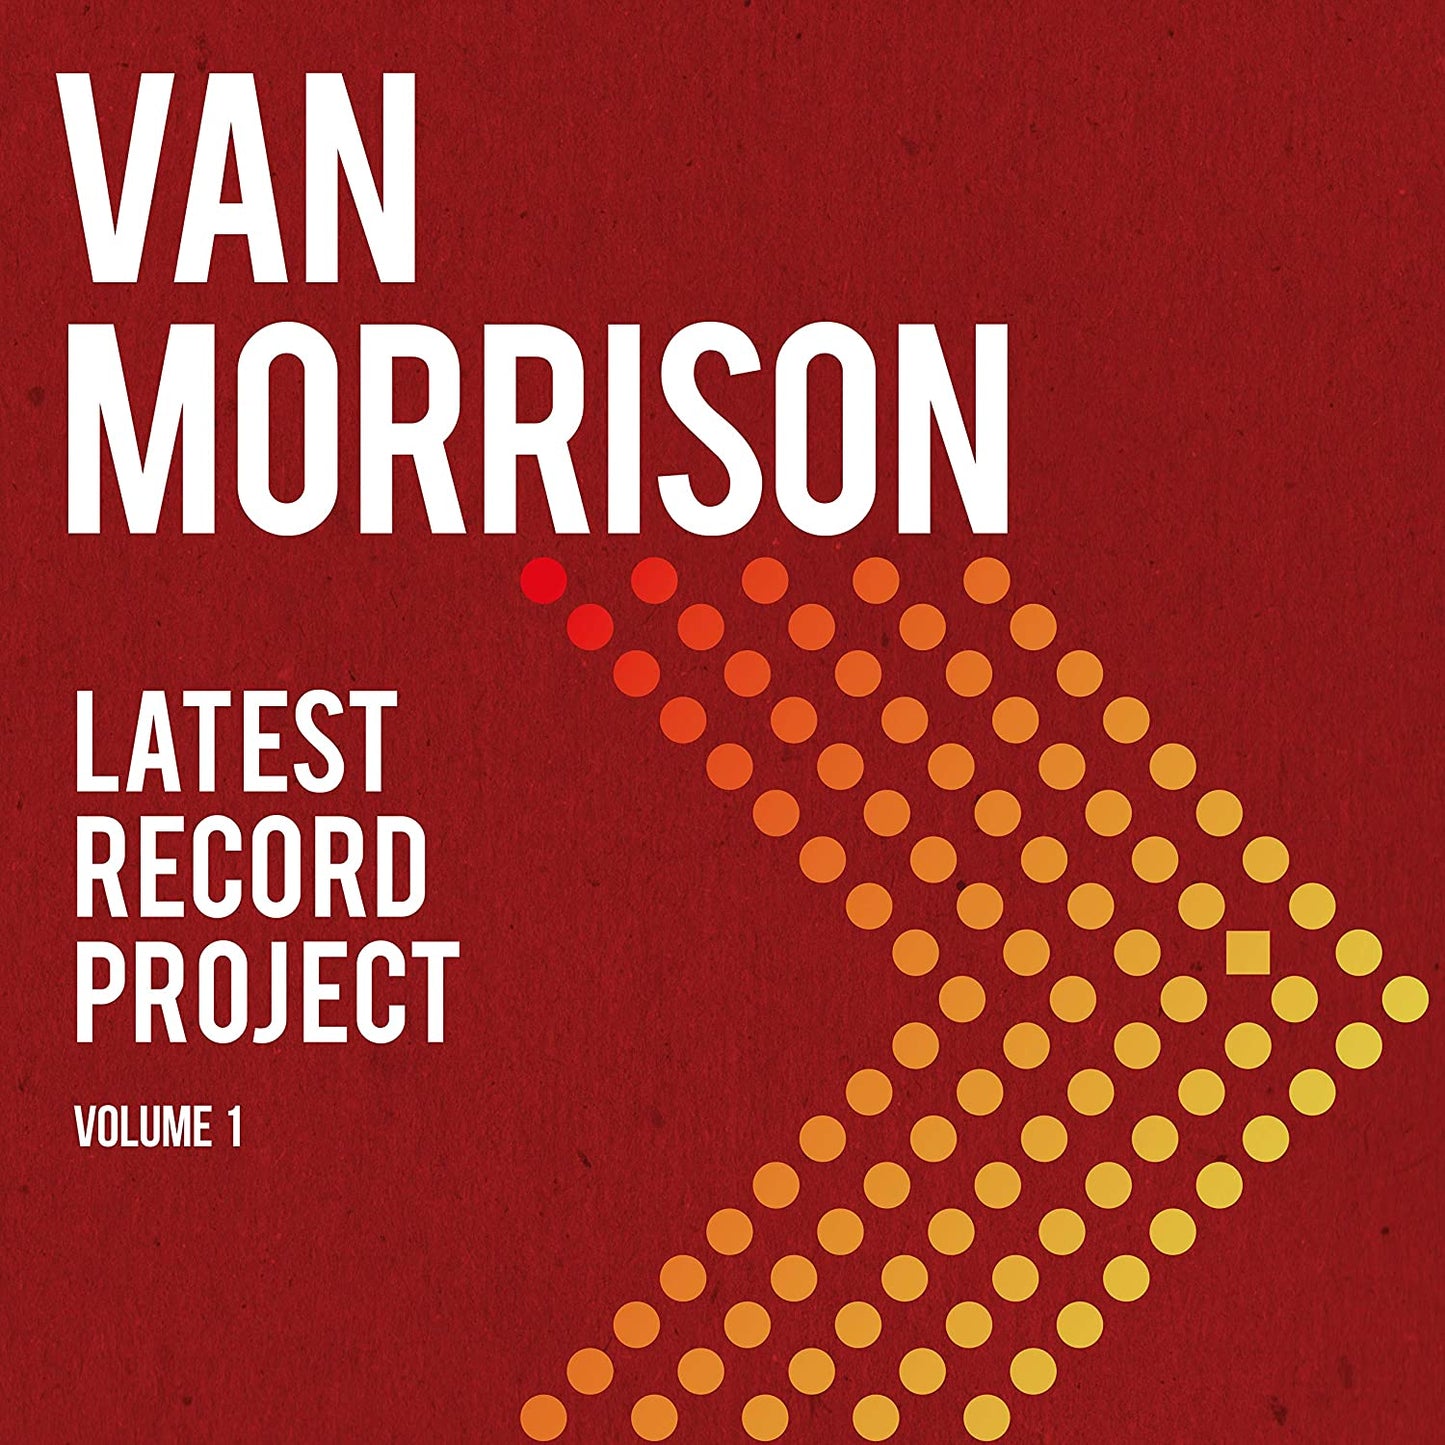 Van Morrison - His Latest Record Project - 2CD